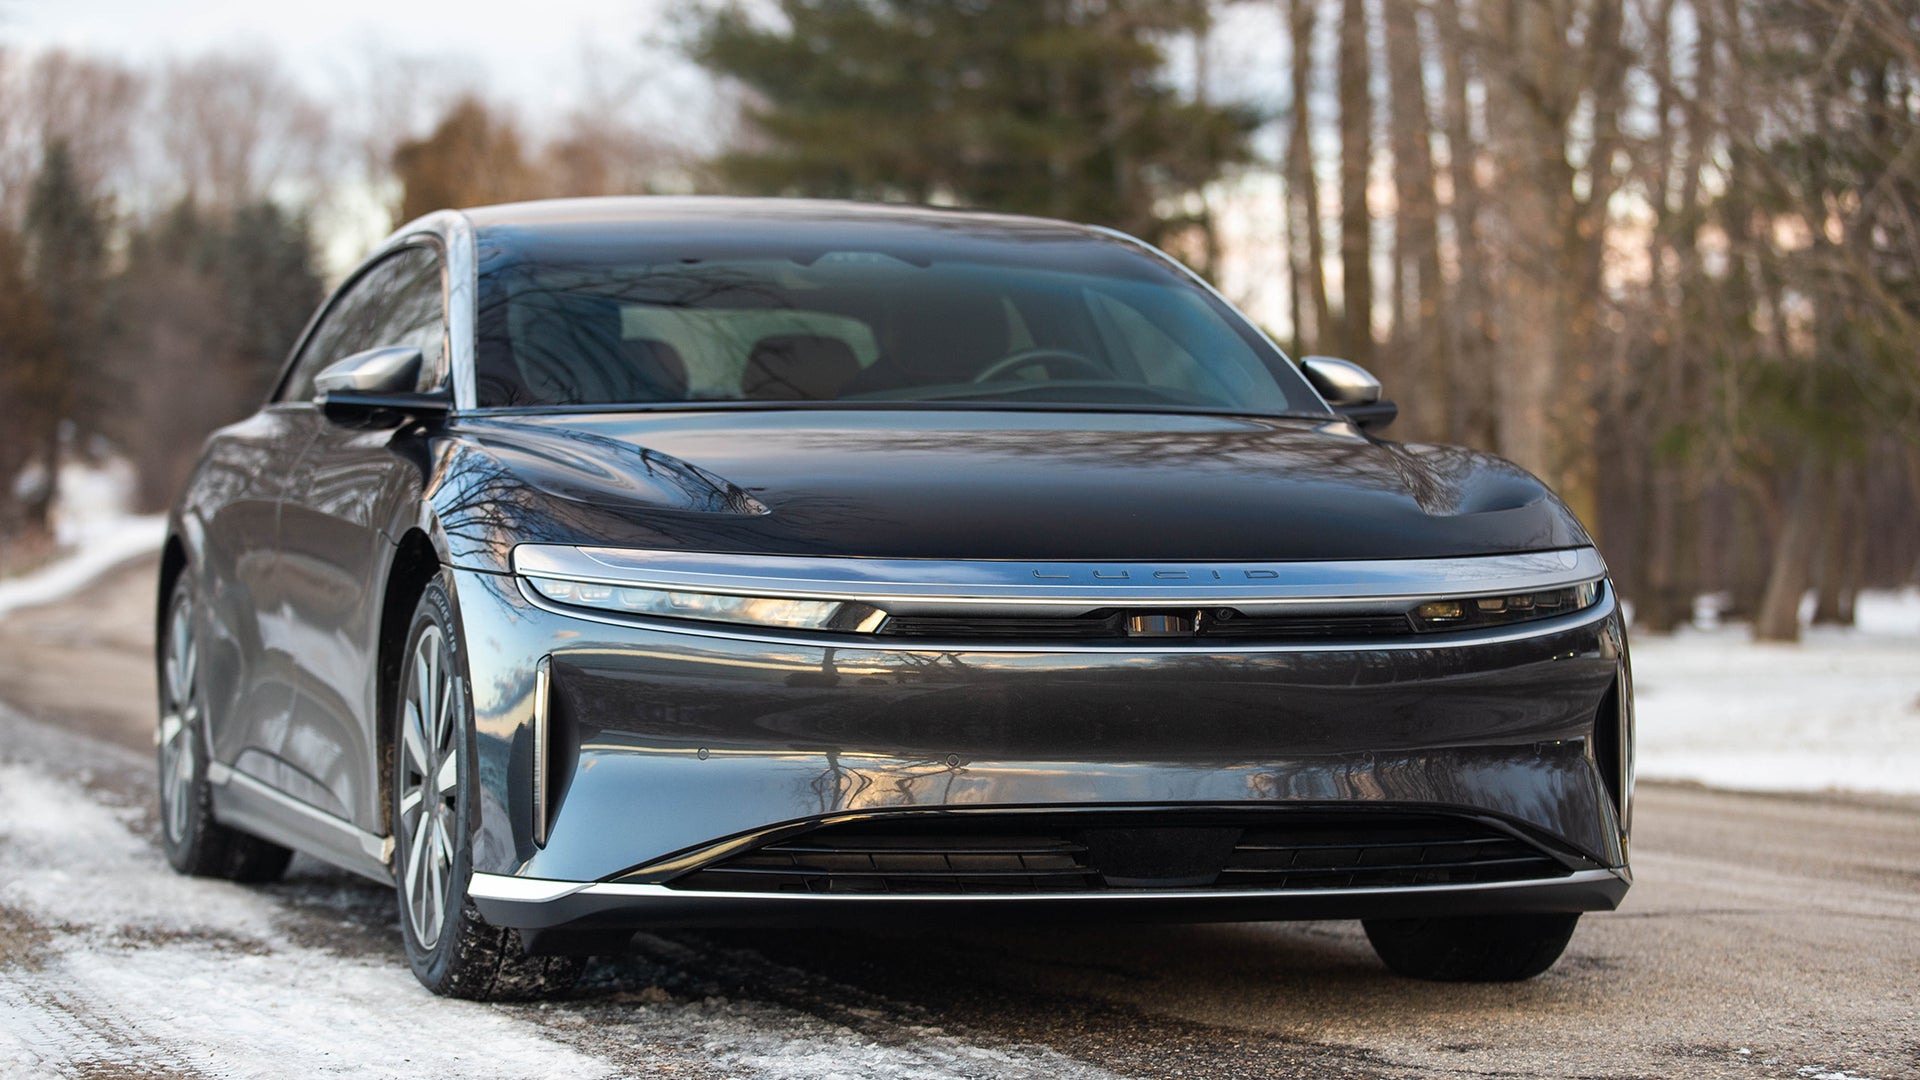 2022 Lucid Air Review: A Luxurious Long-Range EV Marred by Software Bugs